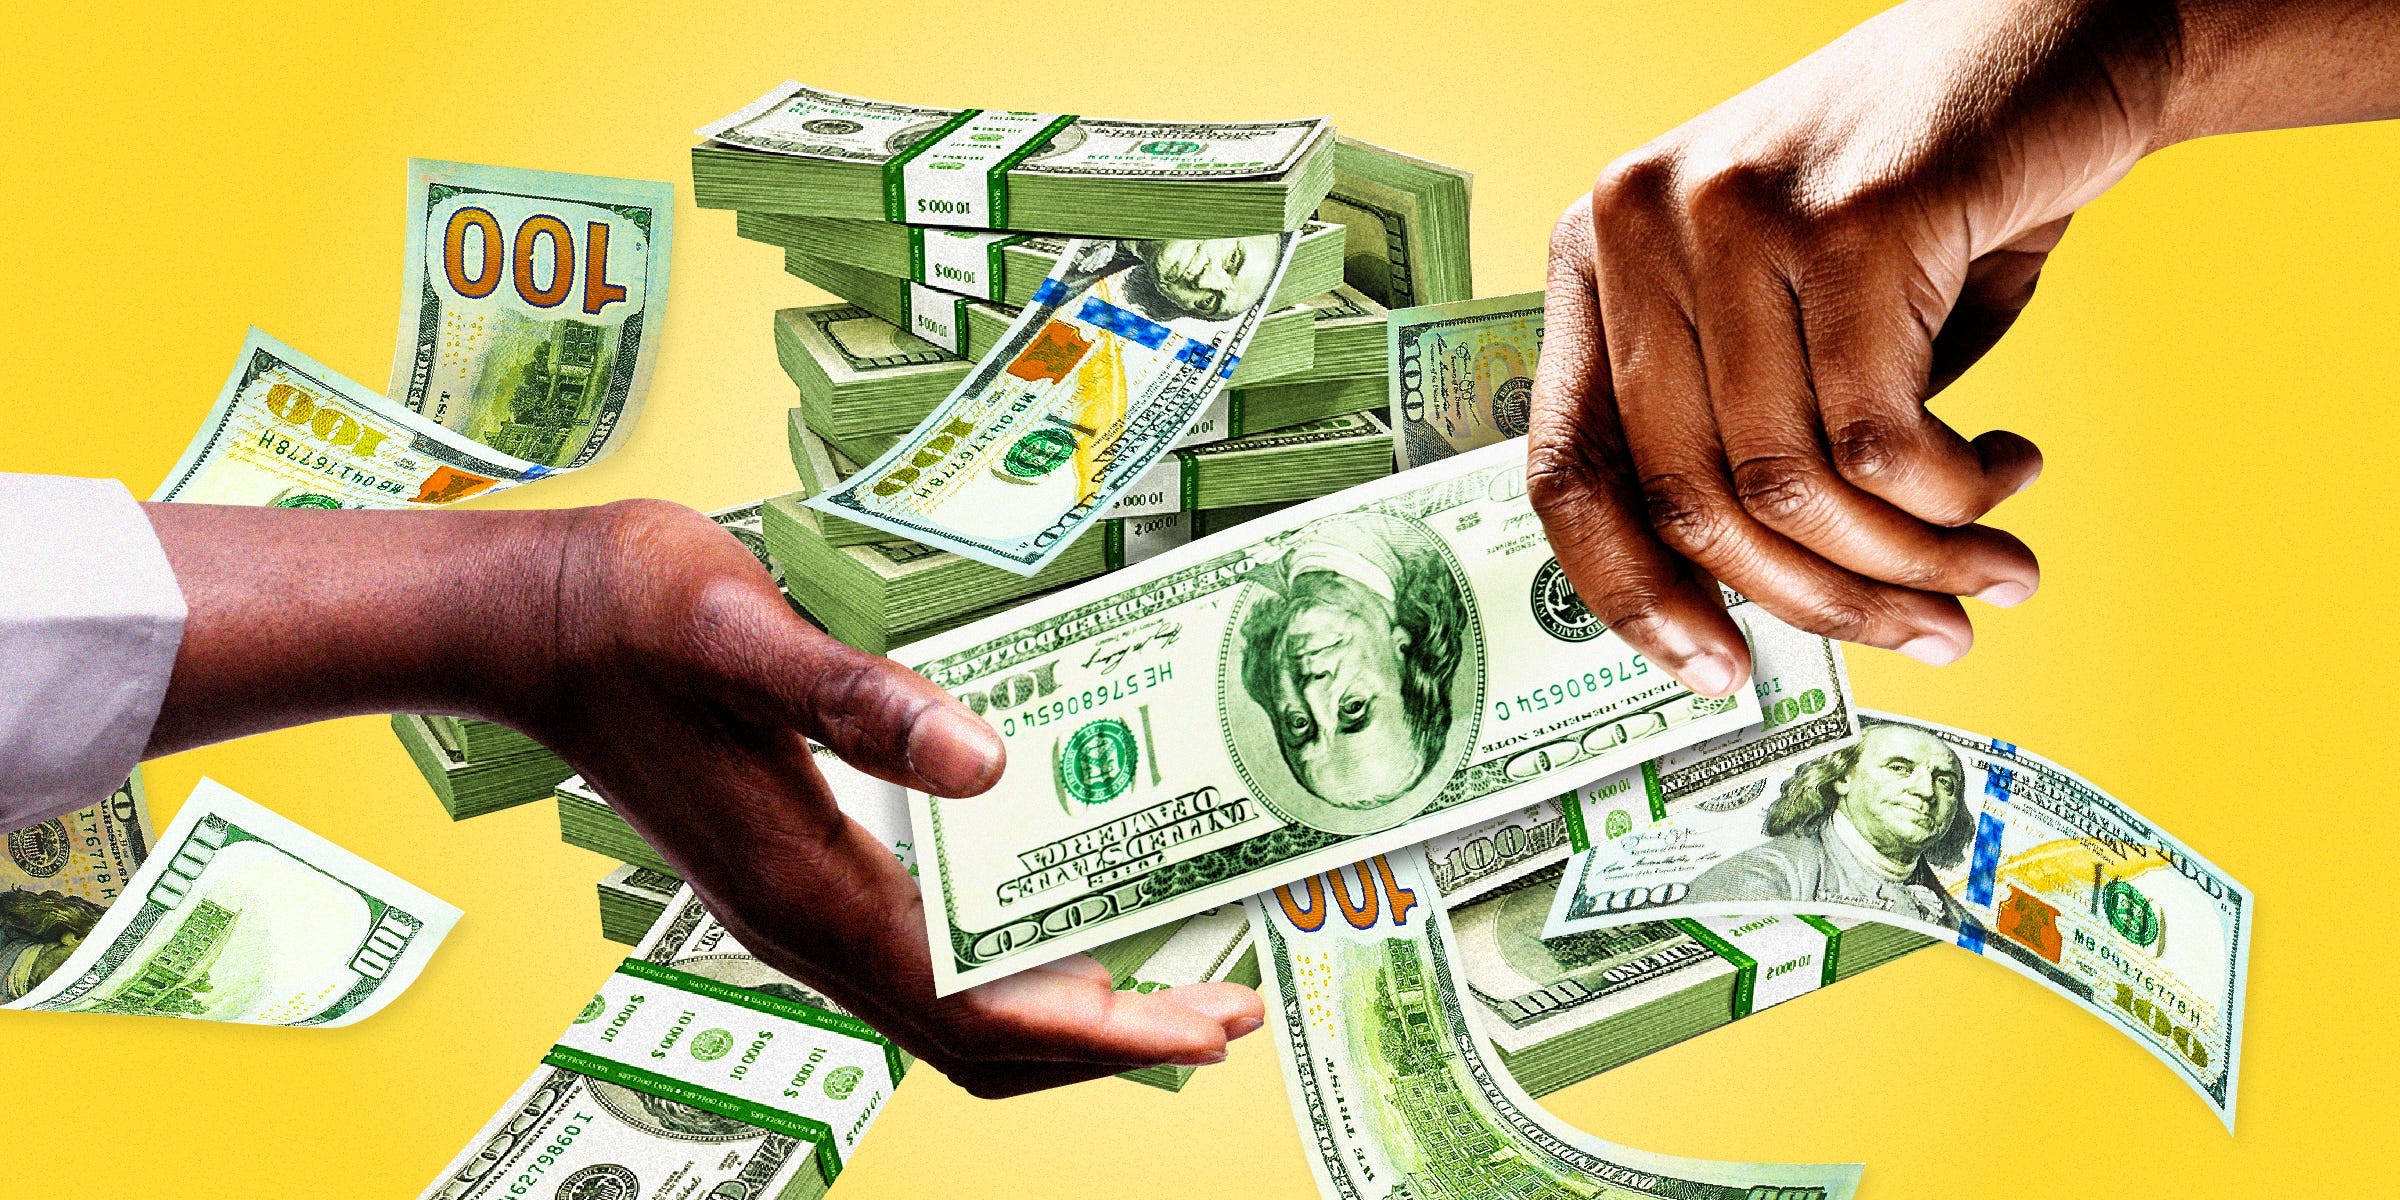 A Black person's hand handing money to another Black person's hand with a pile of money behind them on a yellow background